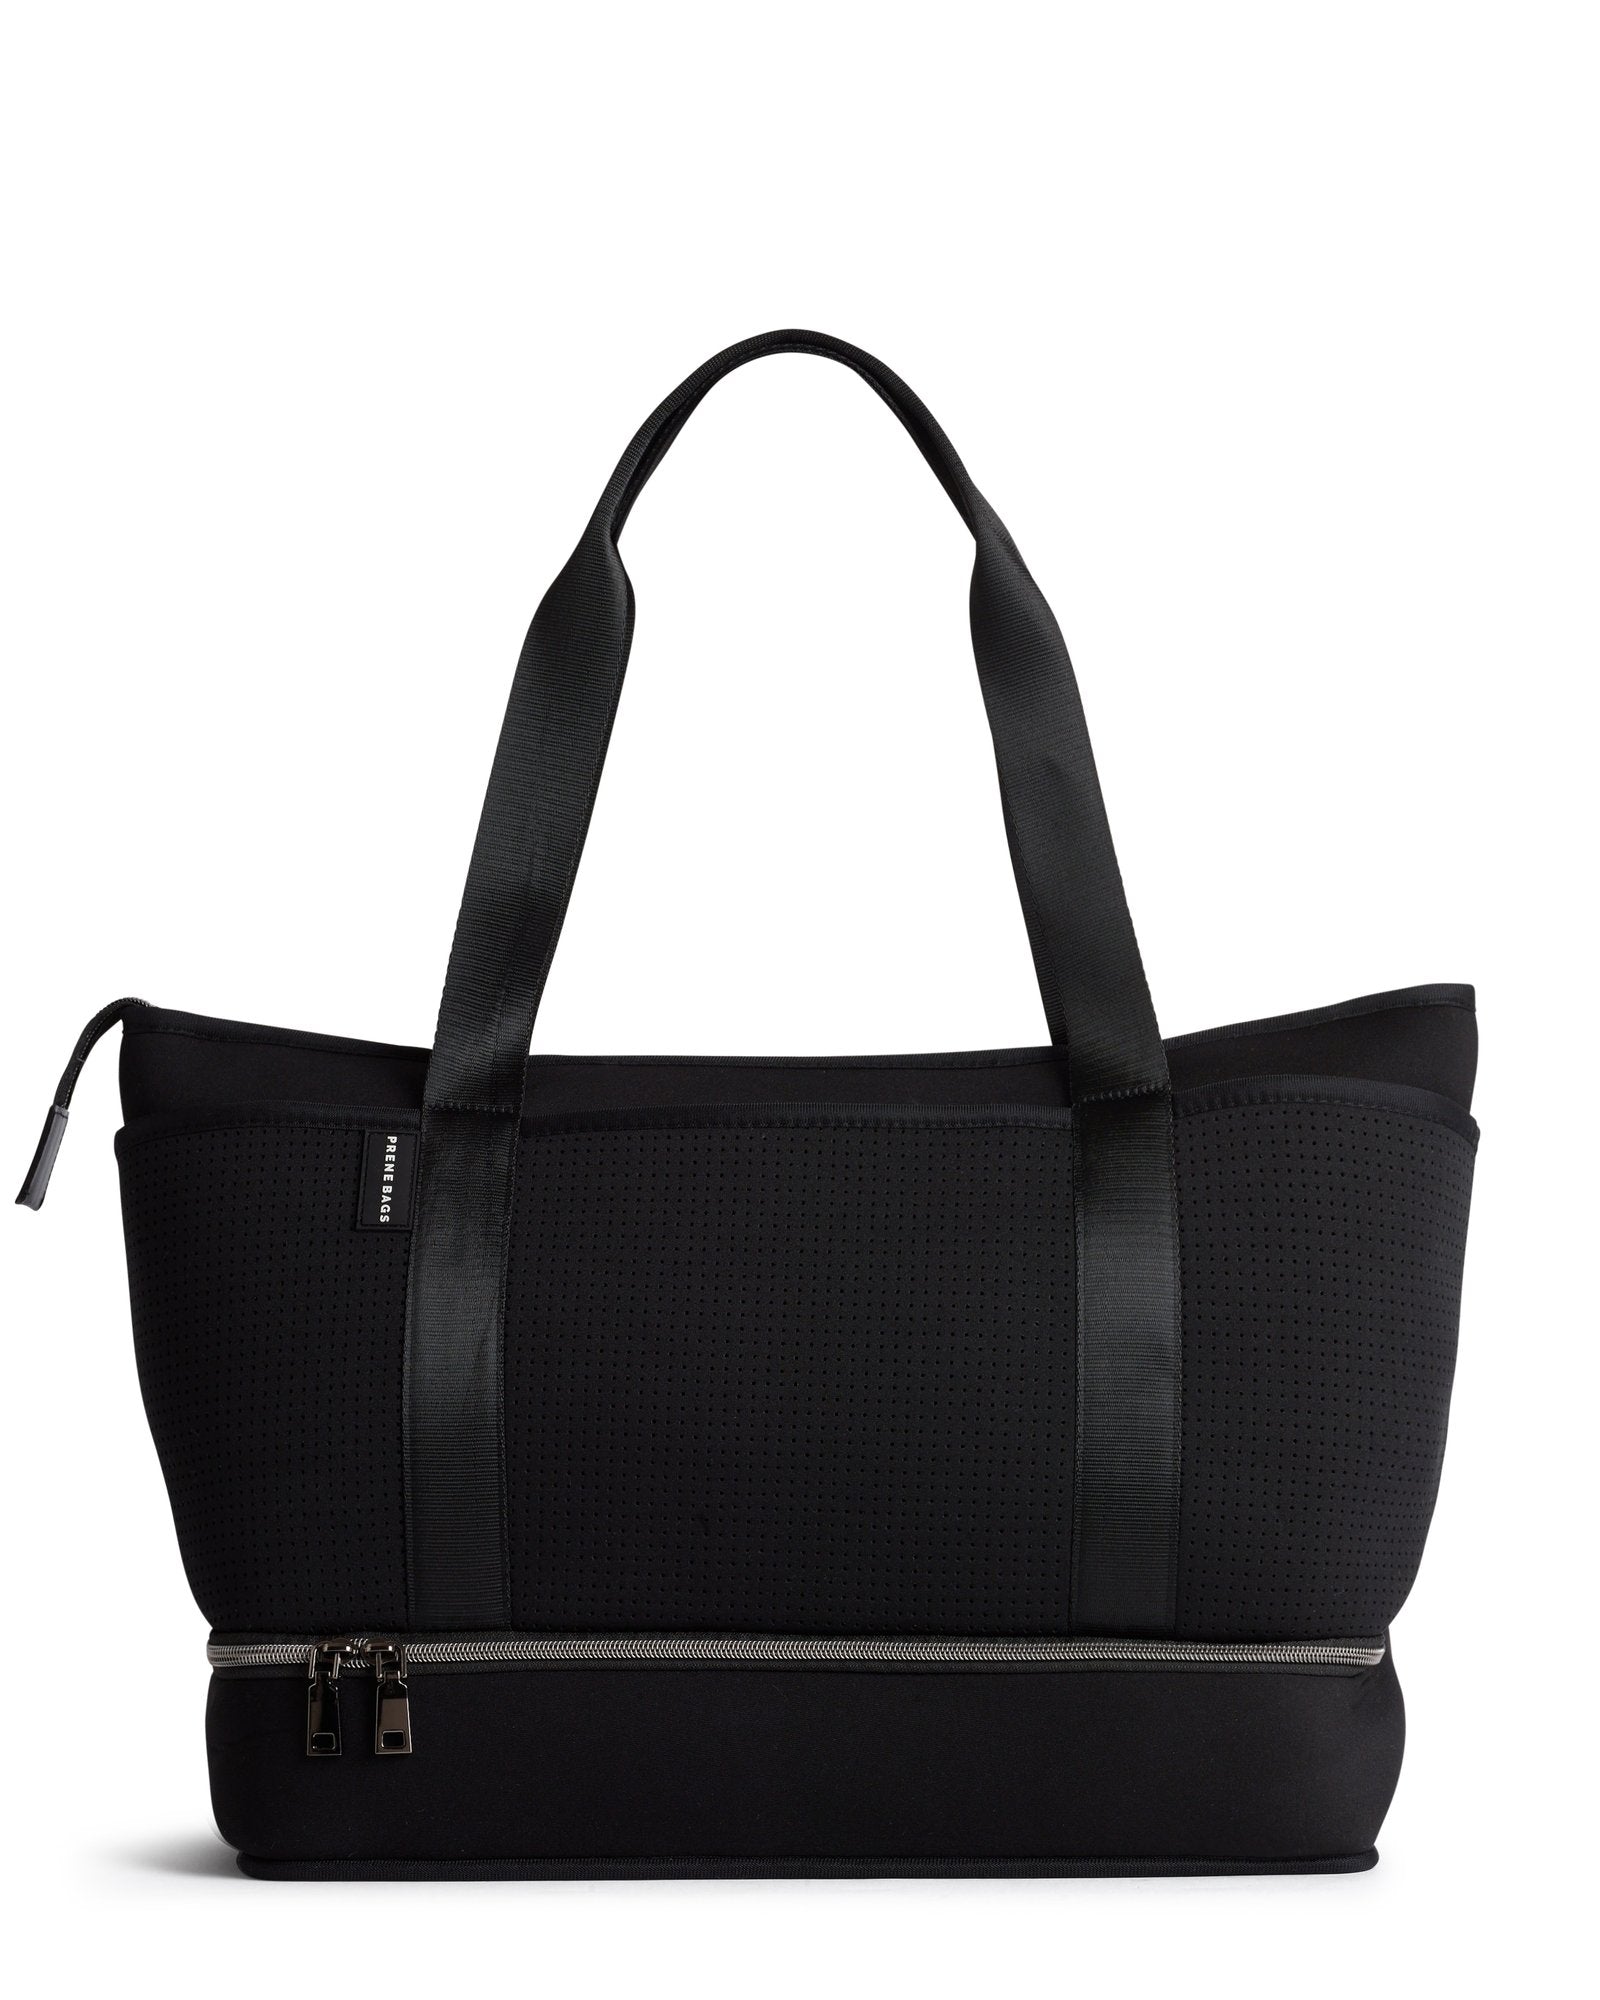 The Sunday Bag - Neoprene Tote, Baby, Travel Bag - ACCESSORIES